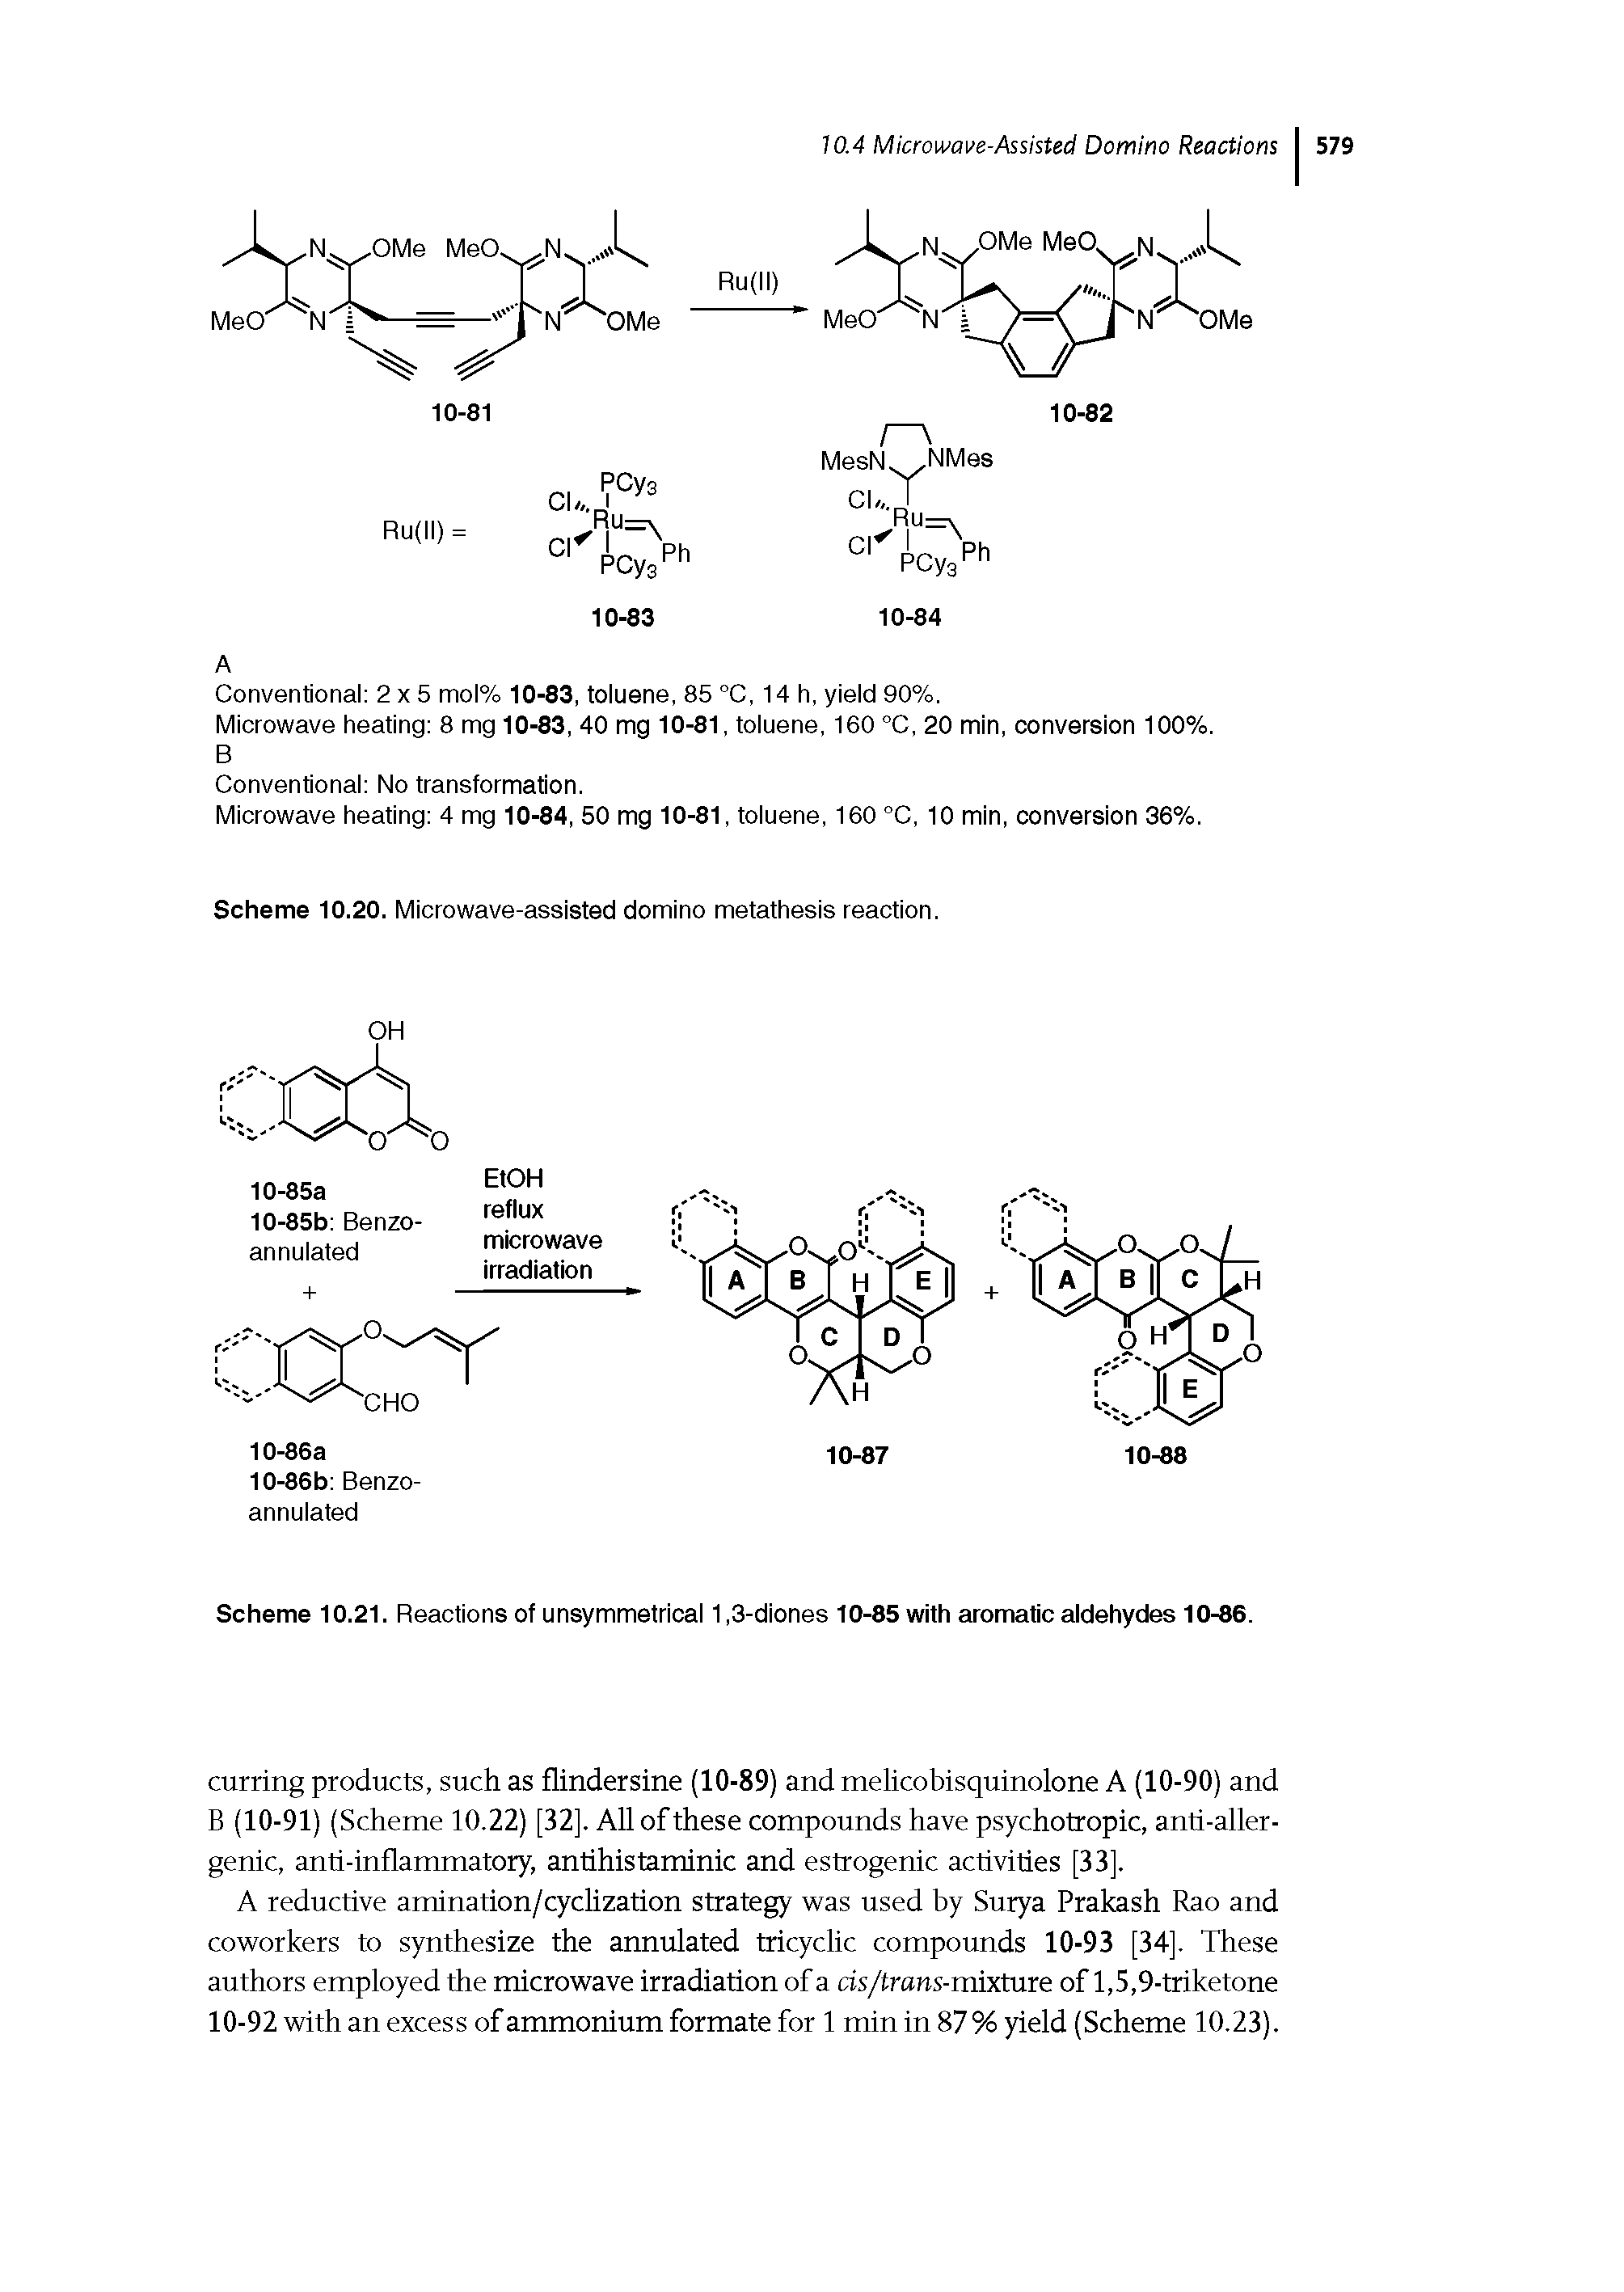 Scheme 10.20. Microwave-assisted domino metathesis reaction.